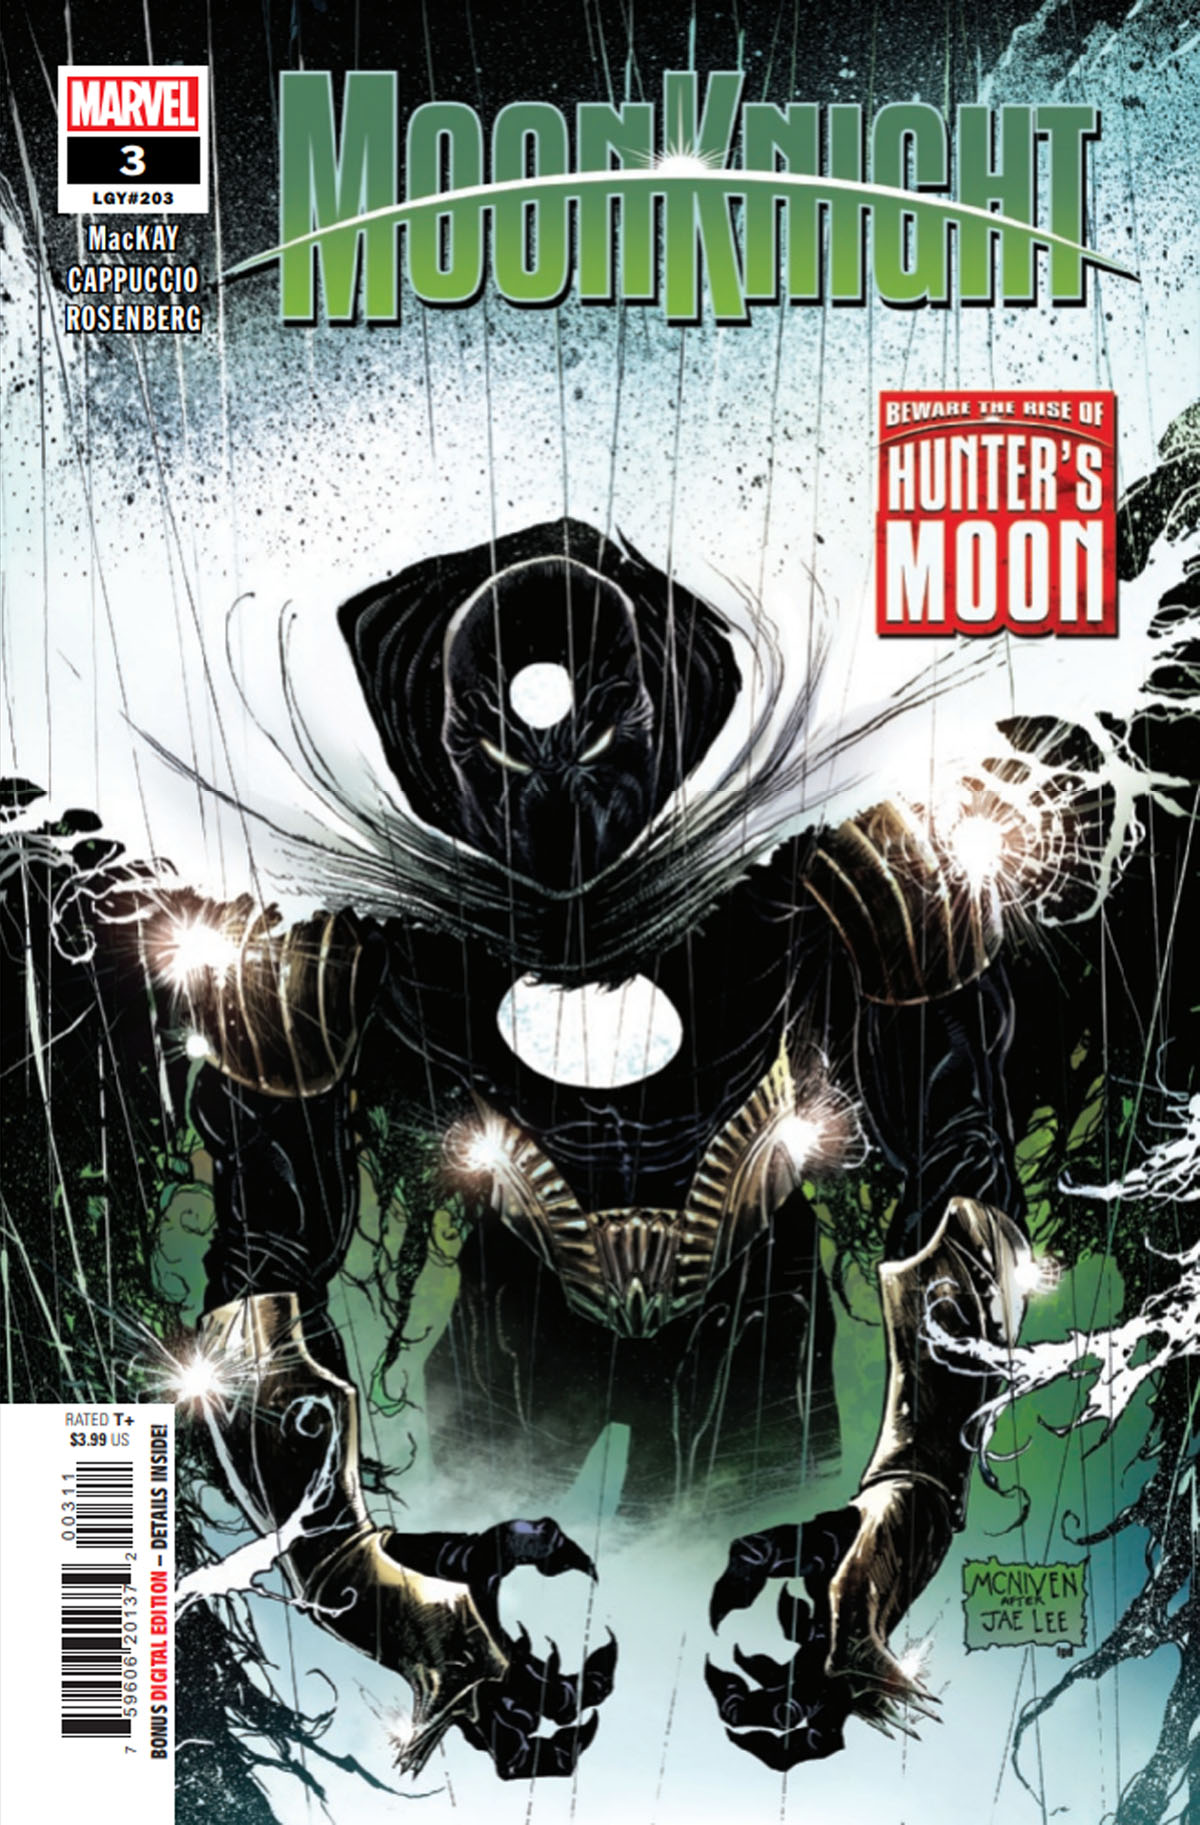 Moon Knight #3 cover